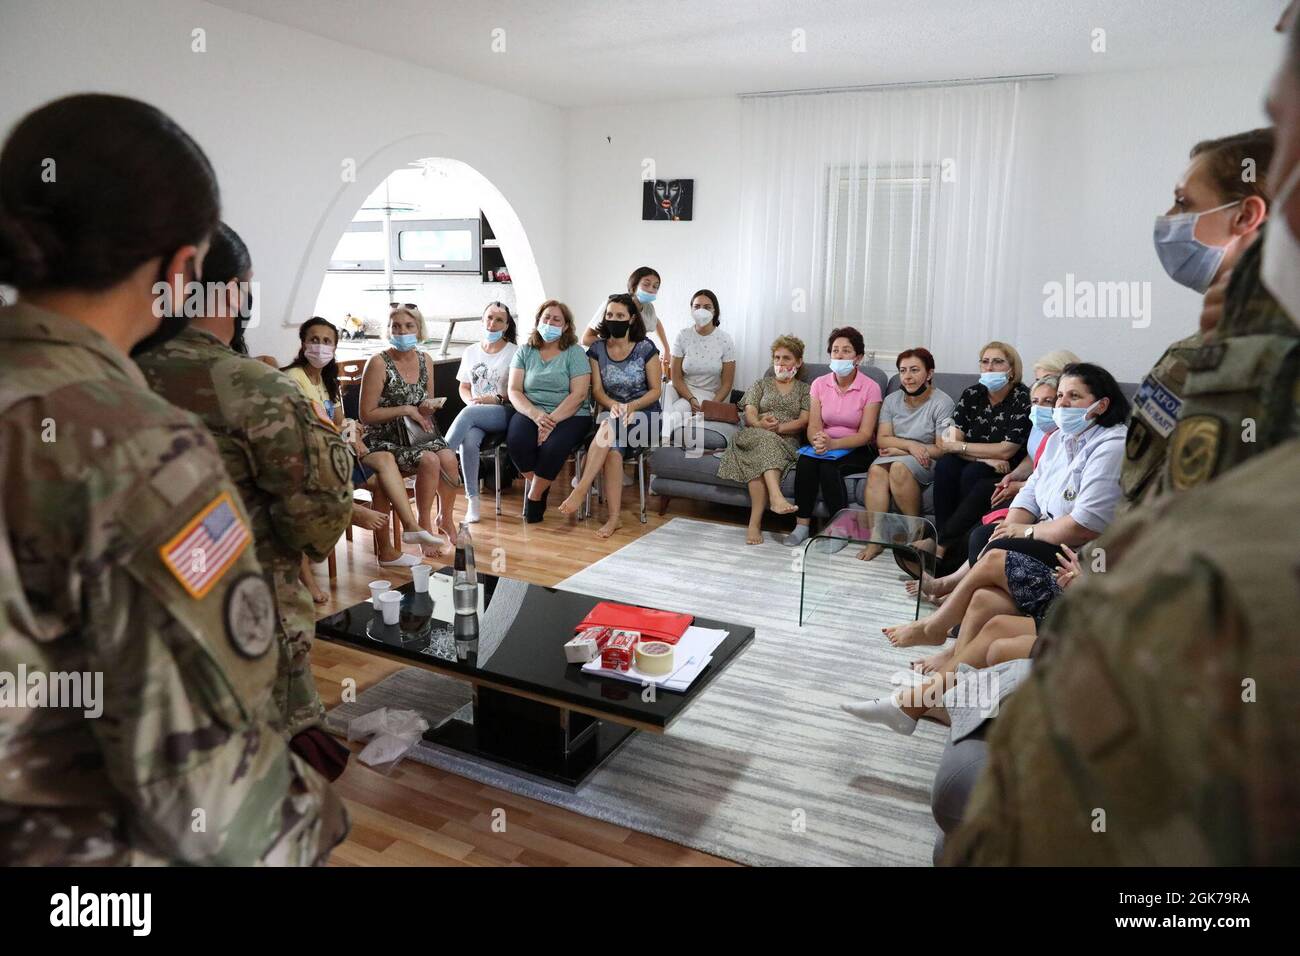 U.S. Army soldiers from Task Force Medical of KFOR Regional Command-East and other supporting units partnered with Non-Government Organization Woman 4 Woman (W4W) to lead an infant and child CPR familiarization session for local women in Gjilan, Kosovo, August 23, 2021. Stock Photo